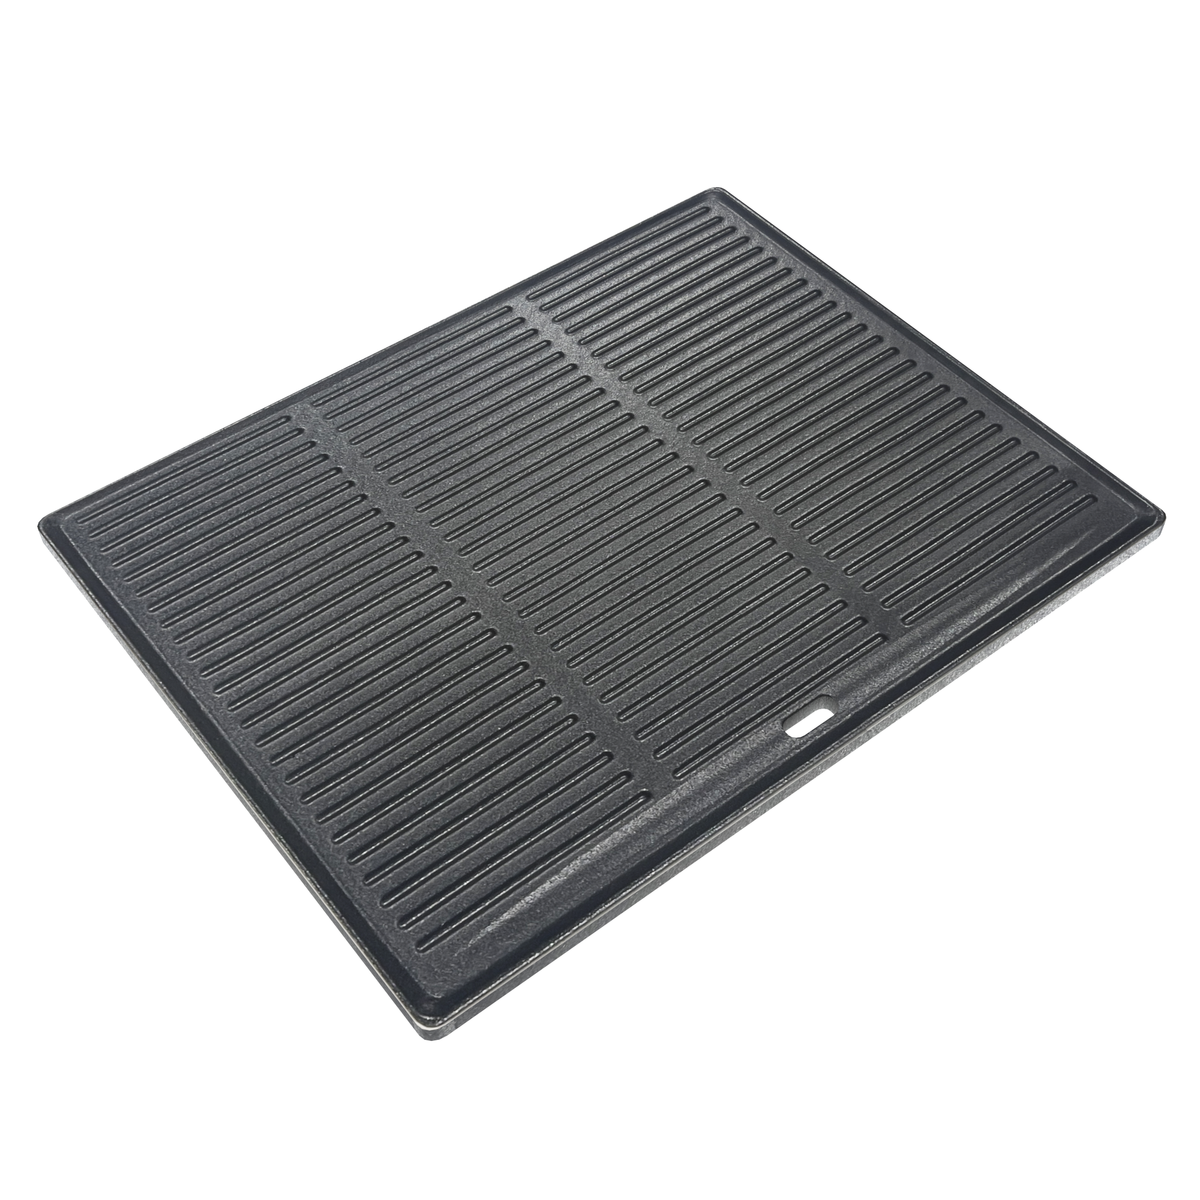 Draco Grills 6 Burner Barbecue Cast Iron Cooking Griddle